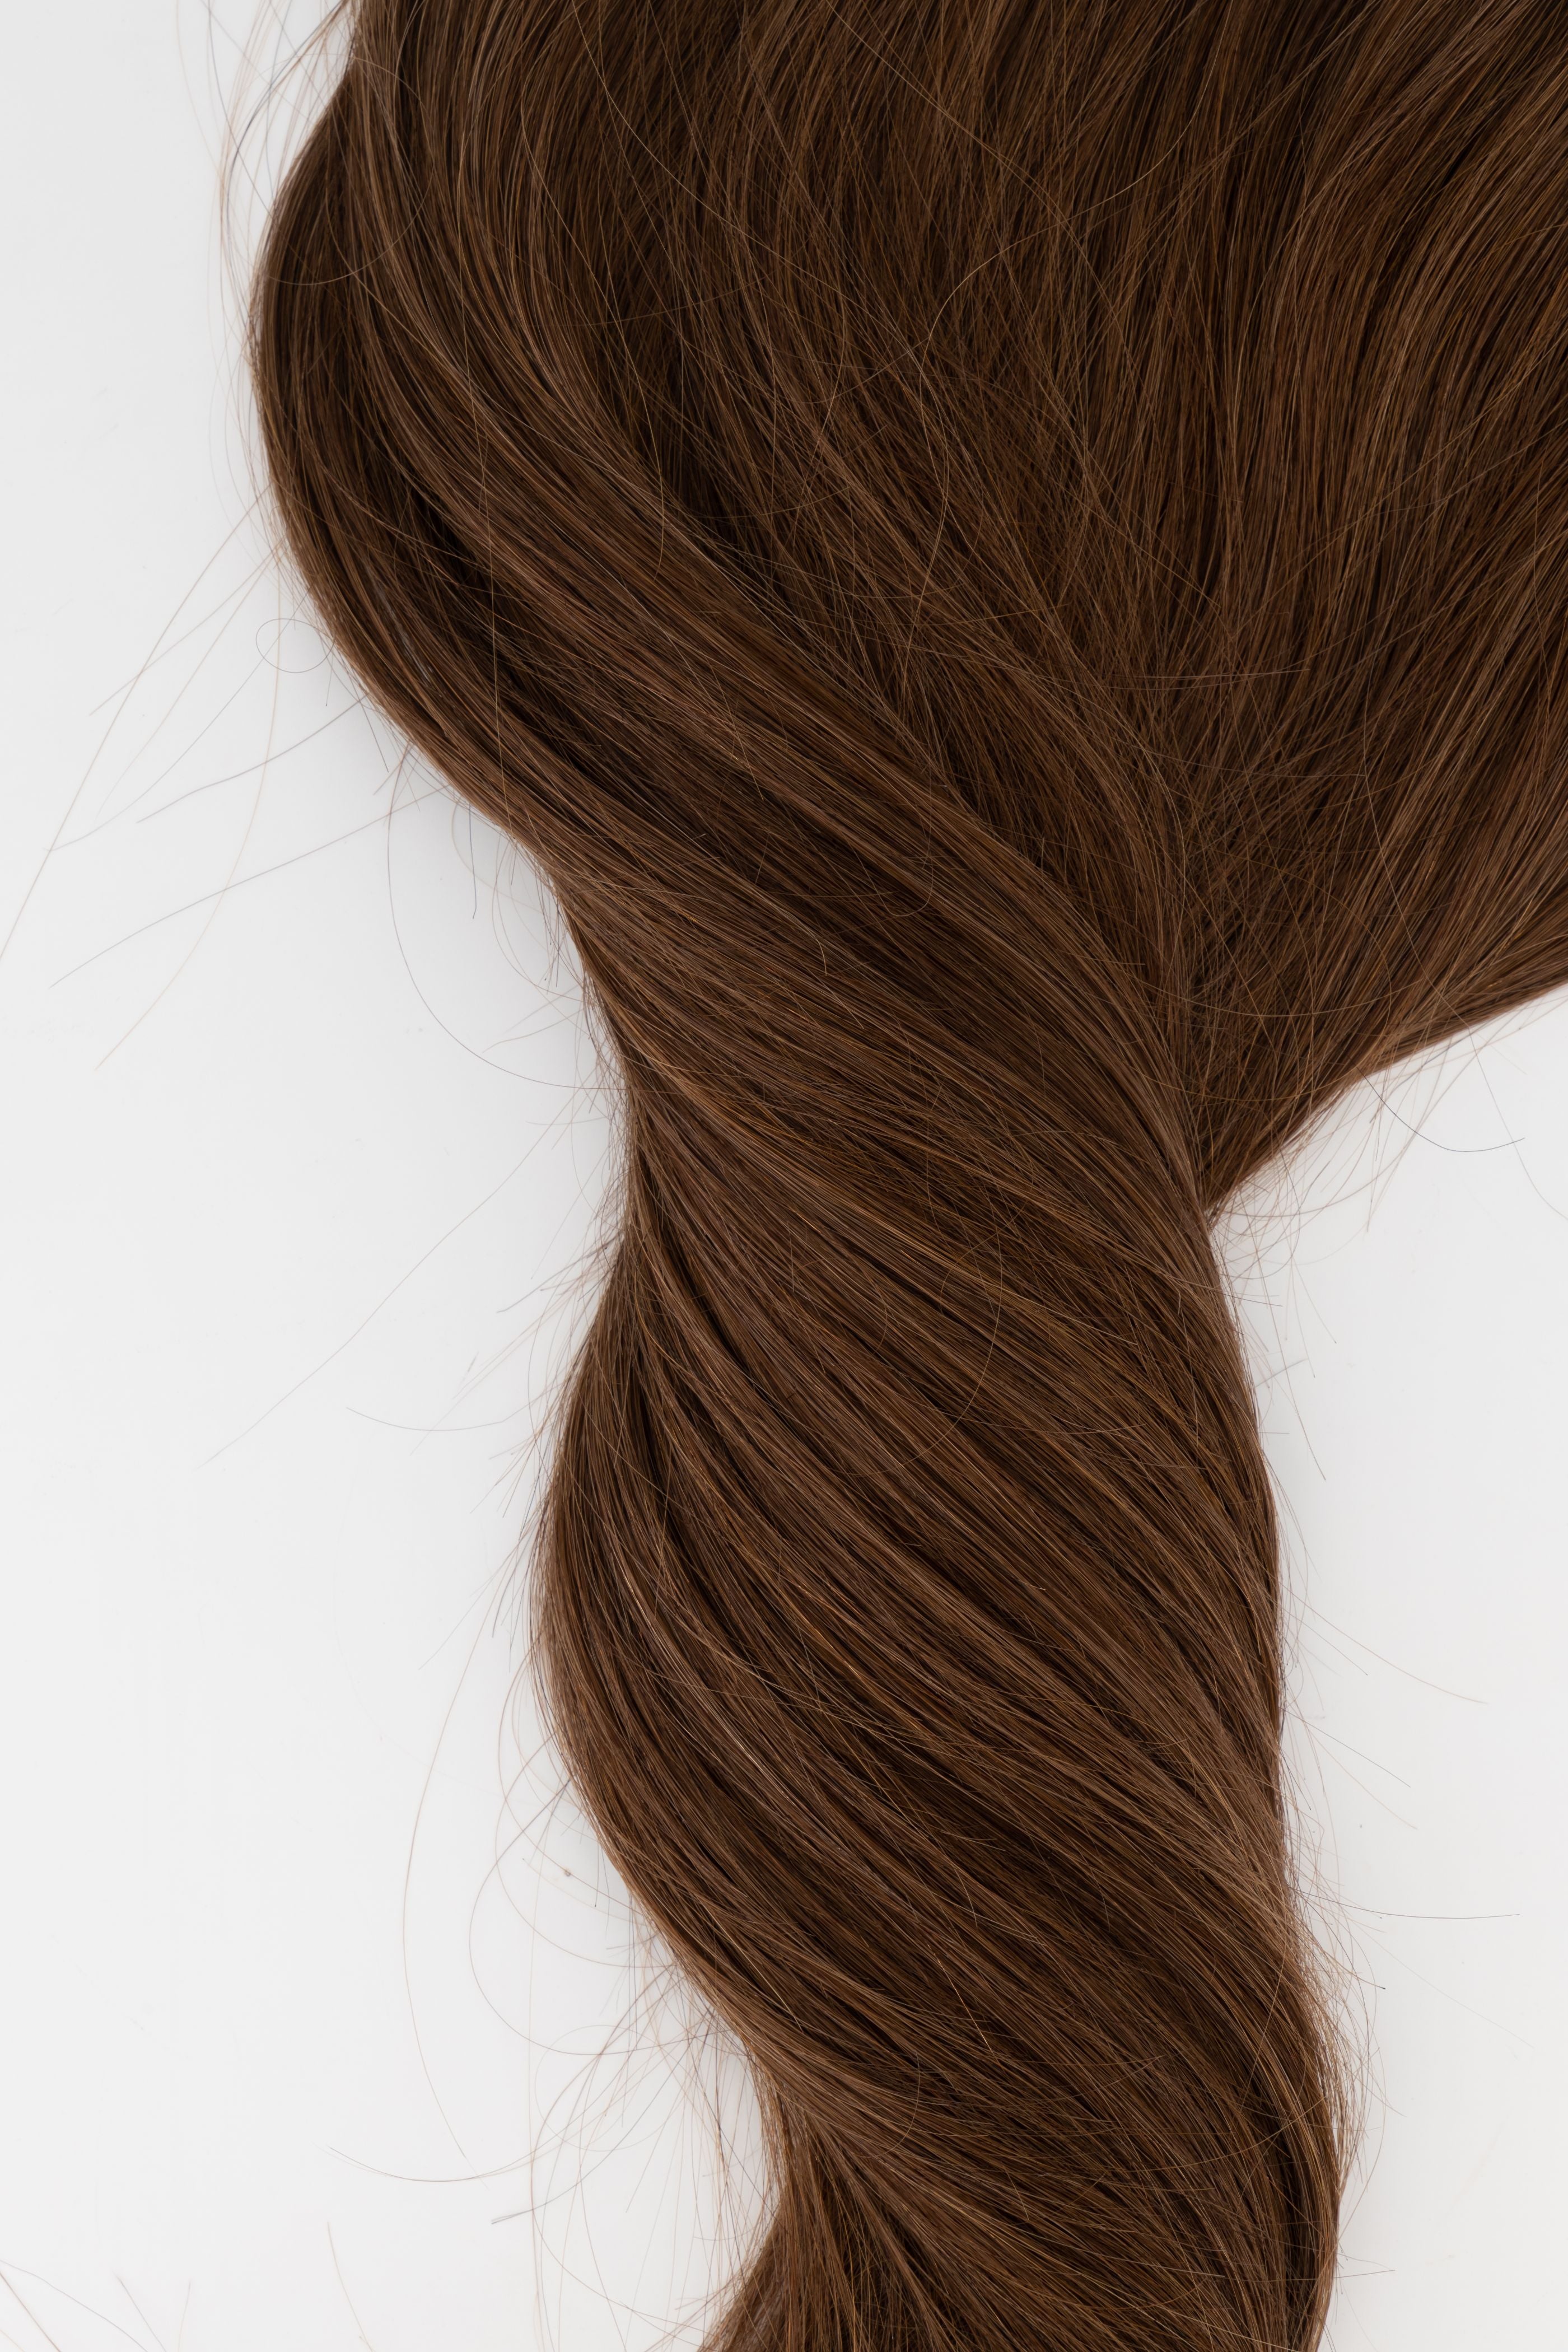 Frontrow halo hair extensions in chocolate brown